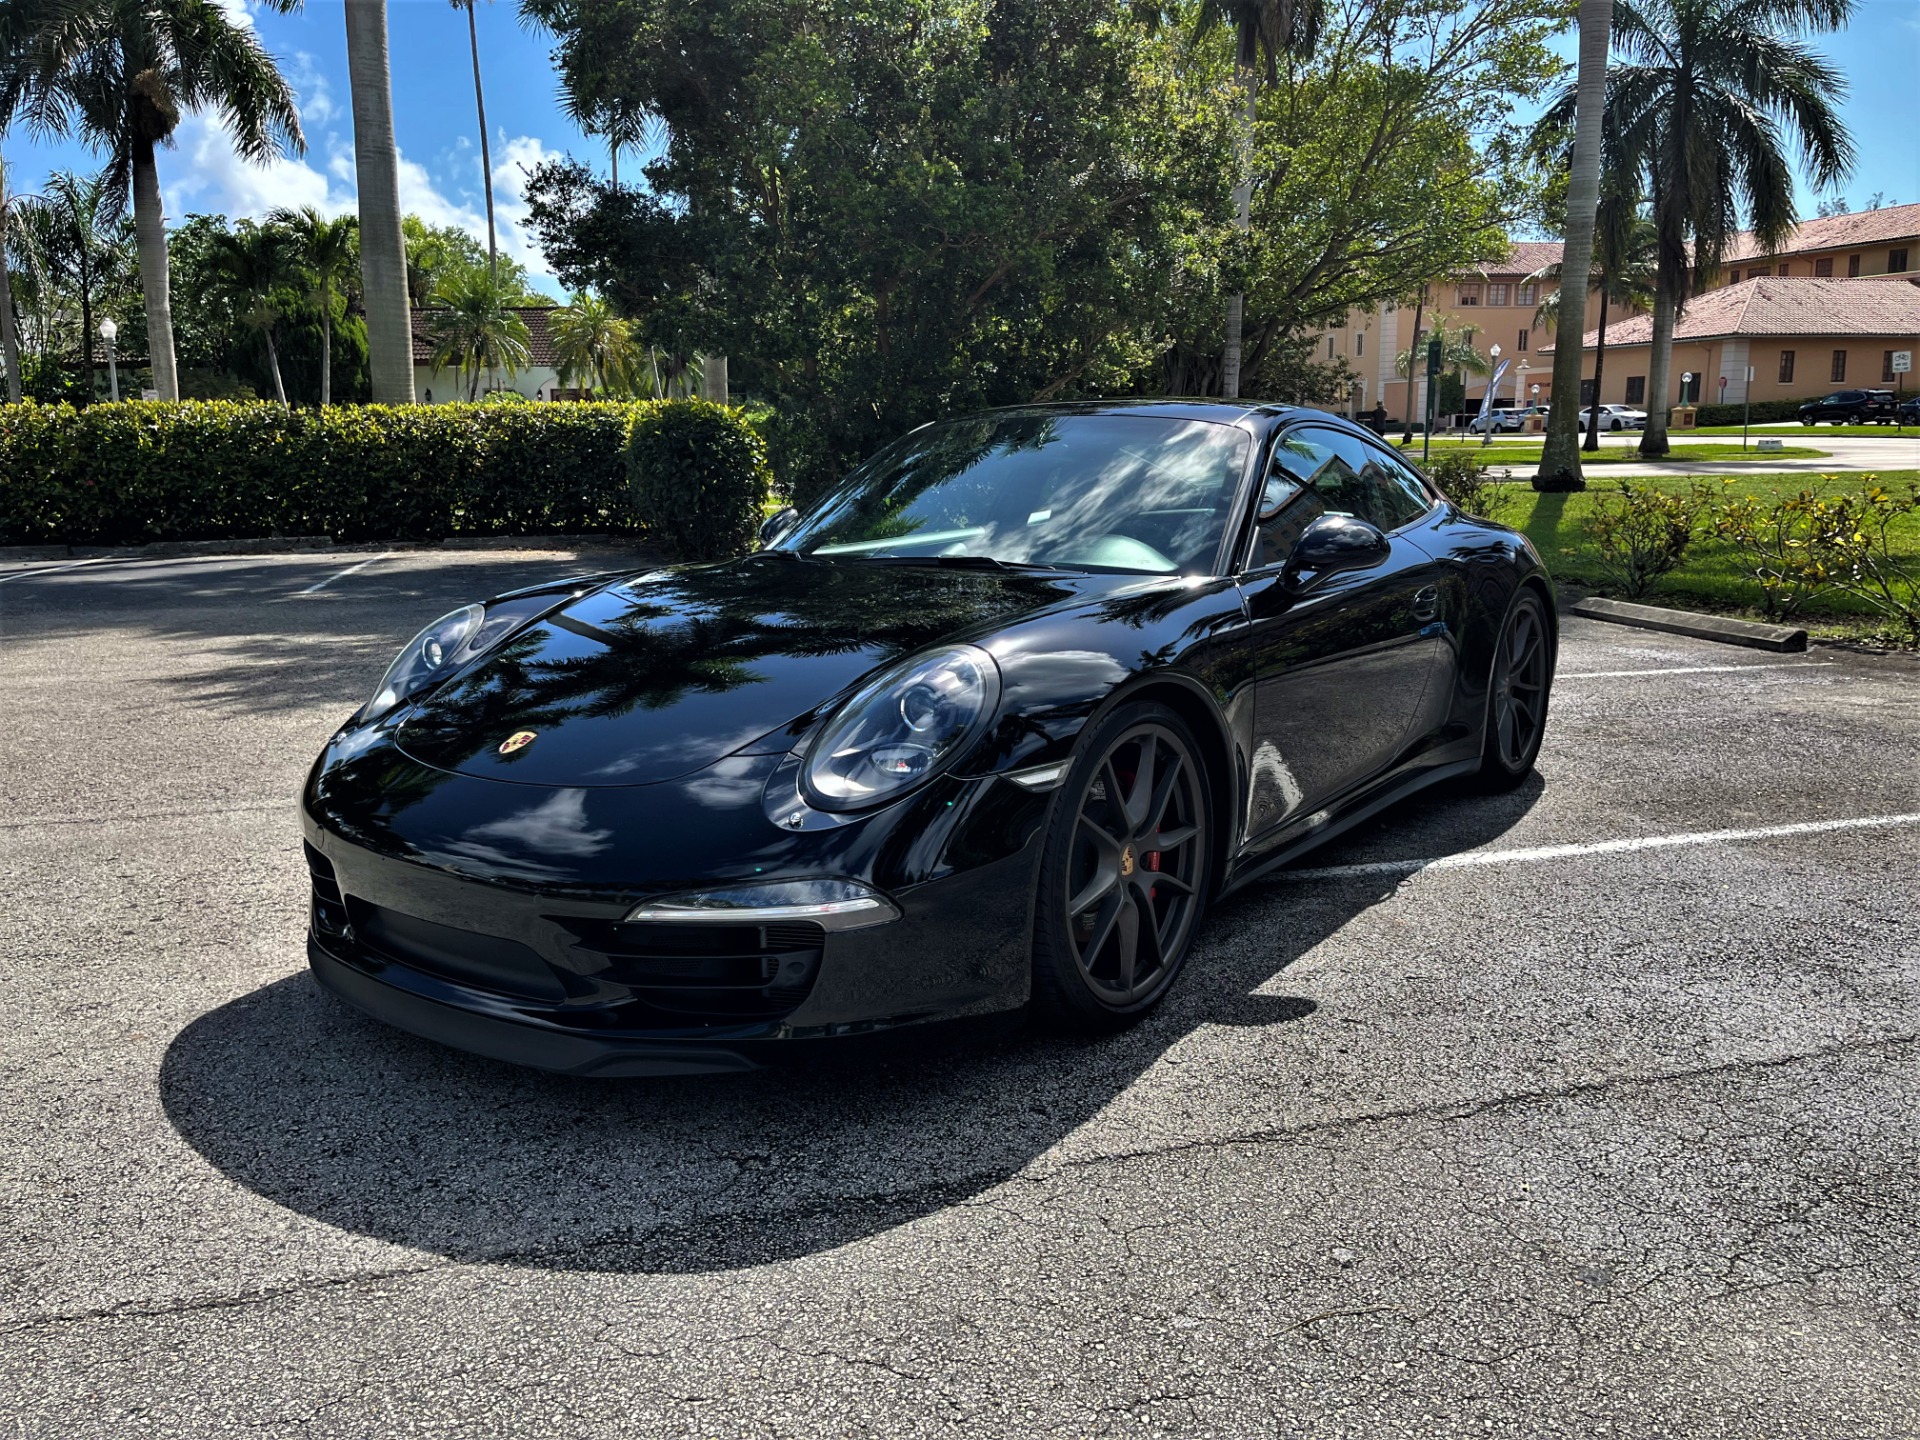 Used 2015 Porsche 911 Carrera 4S for sale Sold at The Gables Sports Cars in Miami FL 33146 3